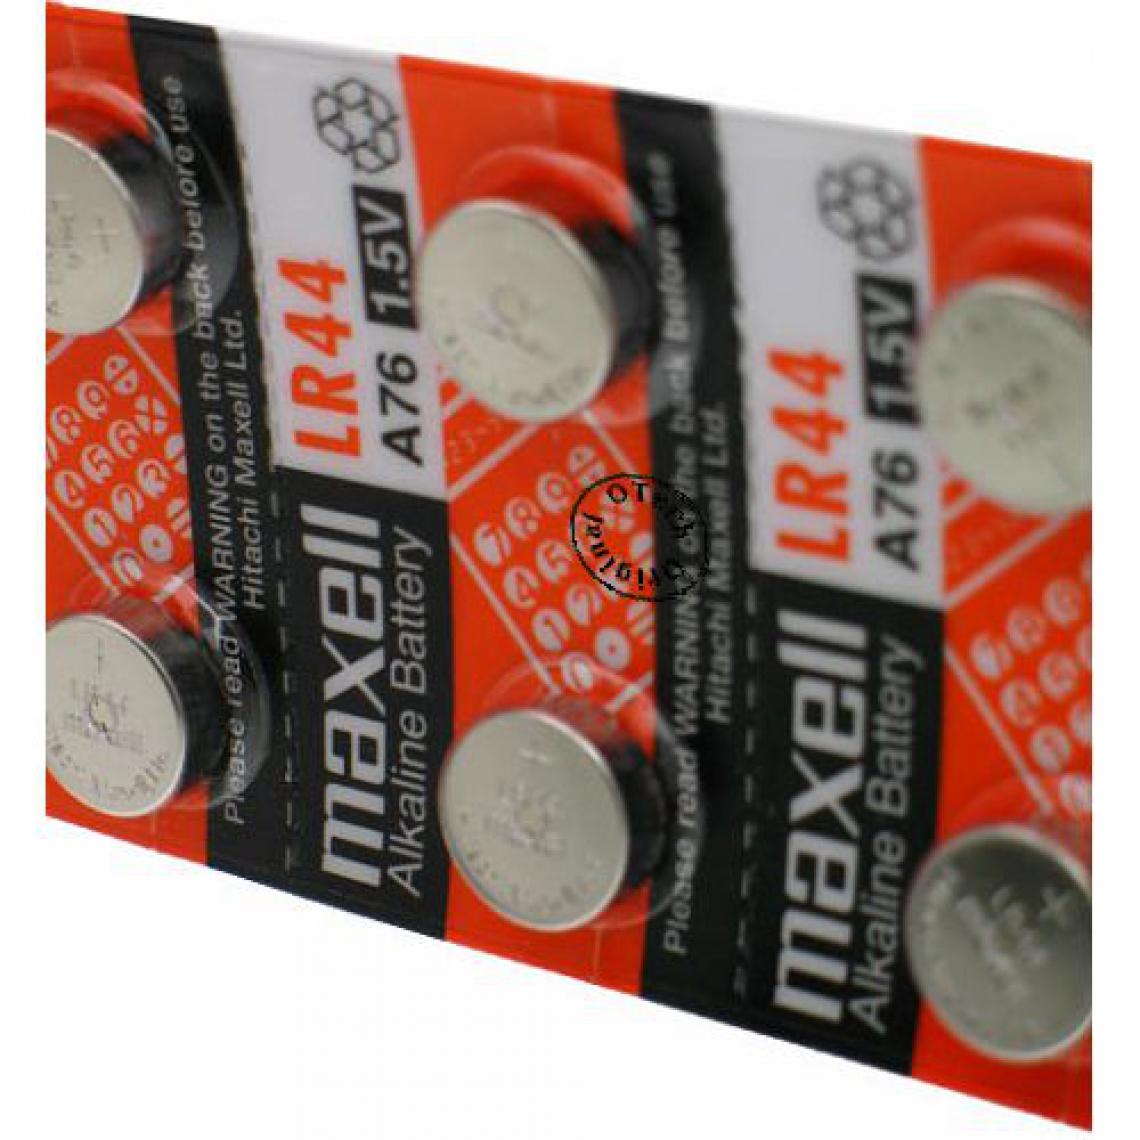 Otech - Pack de 10 piles maxell pour MAXELL GPA7 - Piles rechargeables